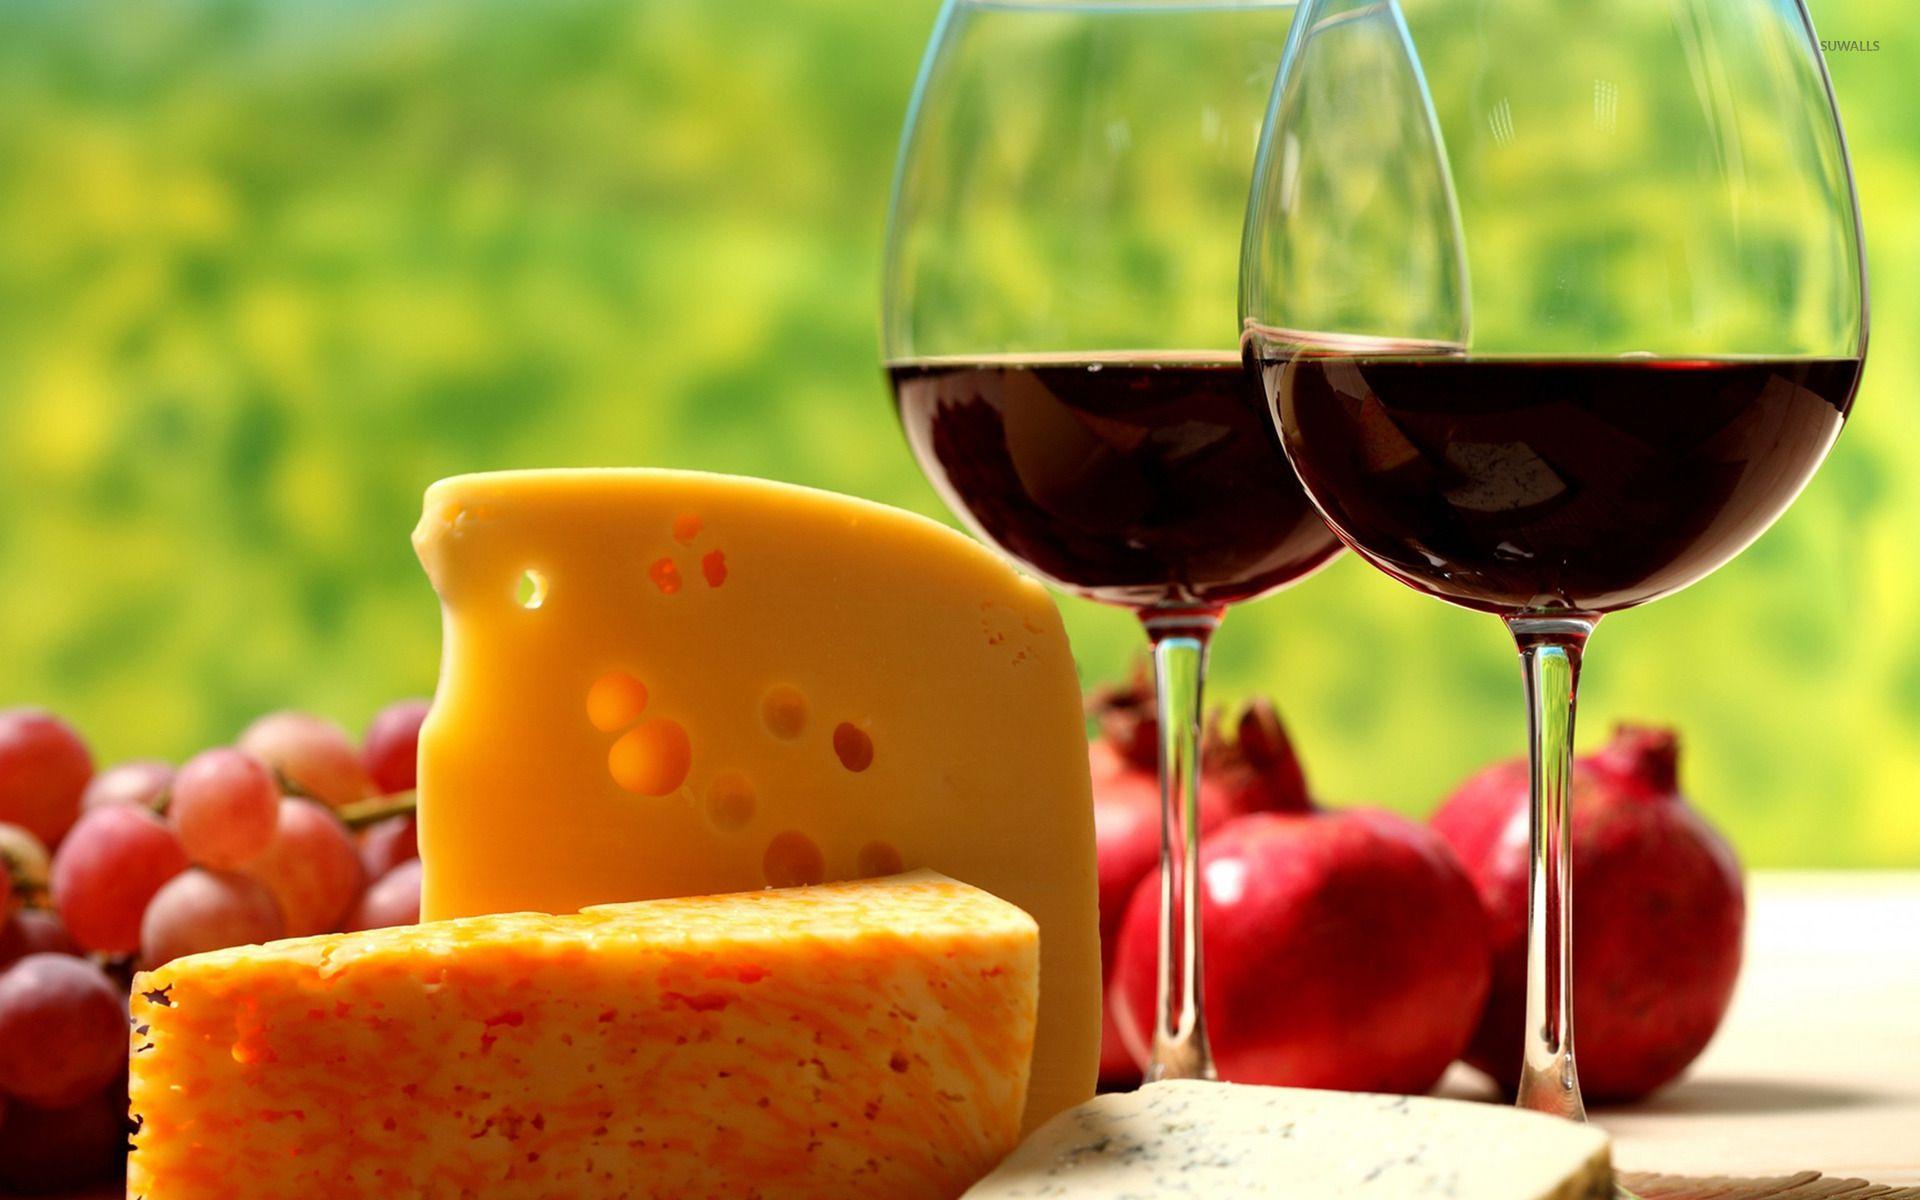 Cheese and wine wallpaper wallpaper